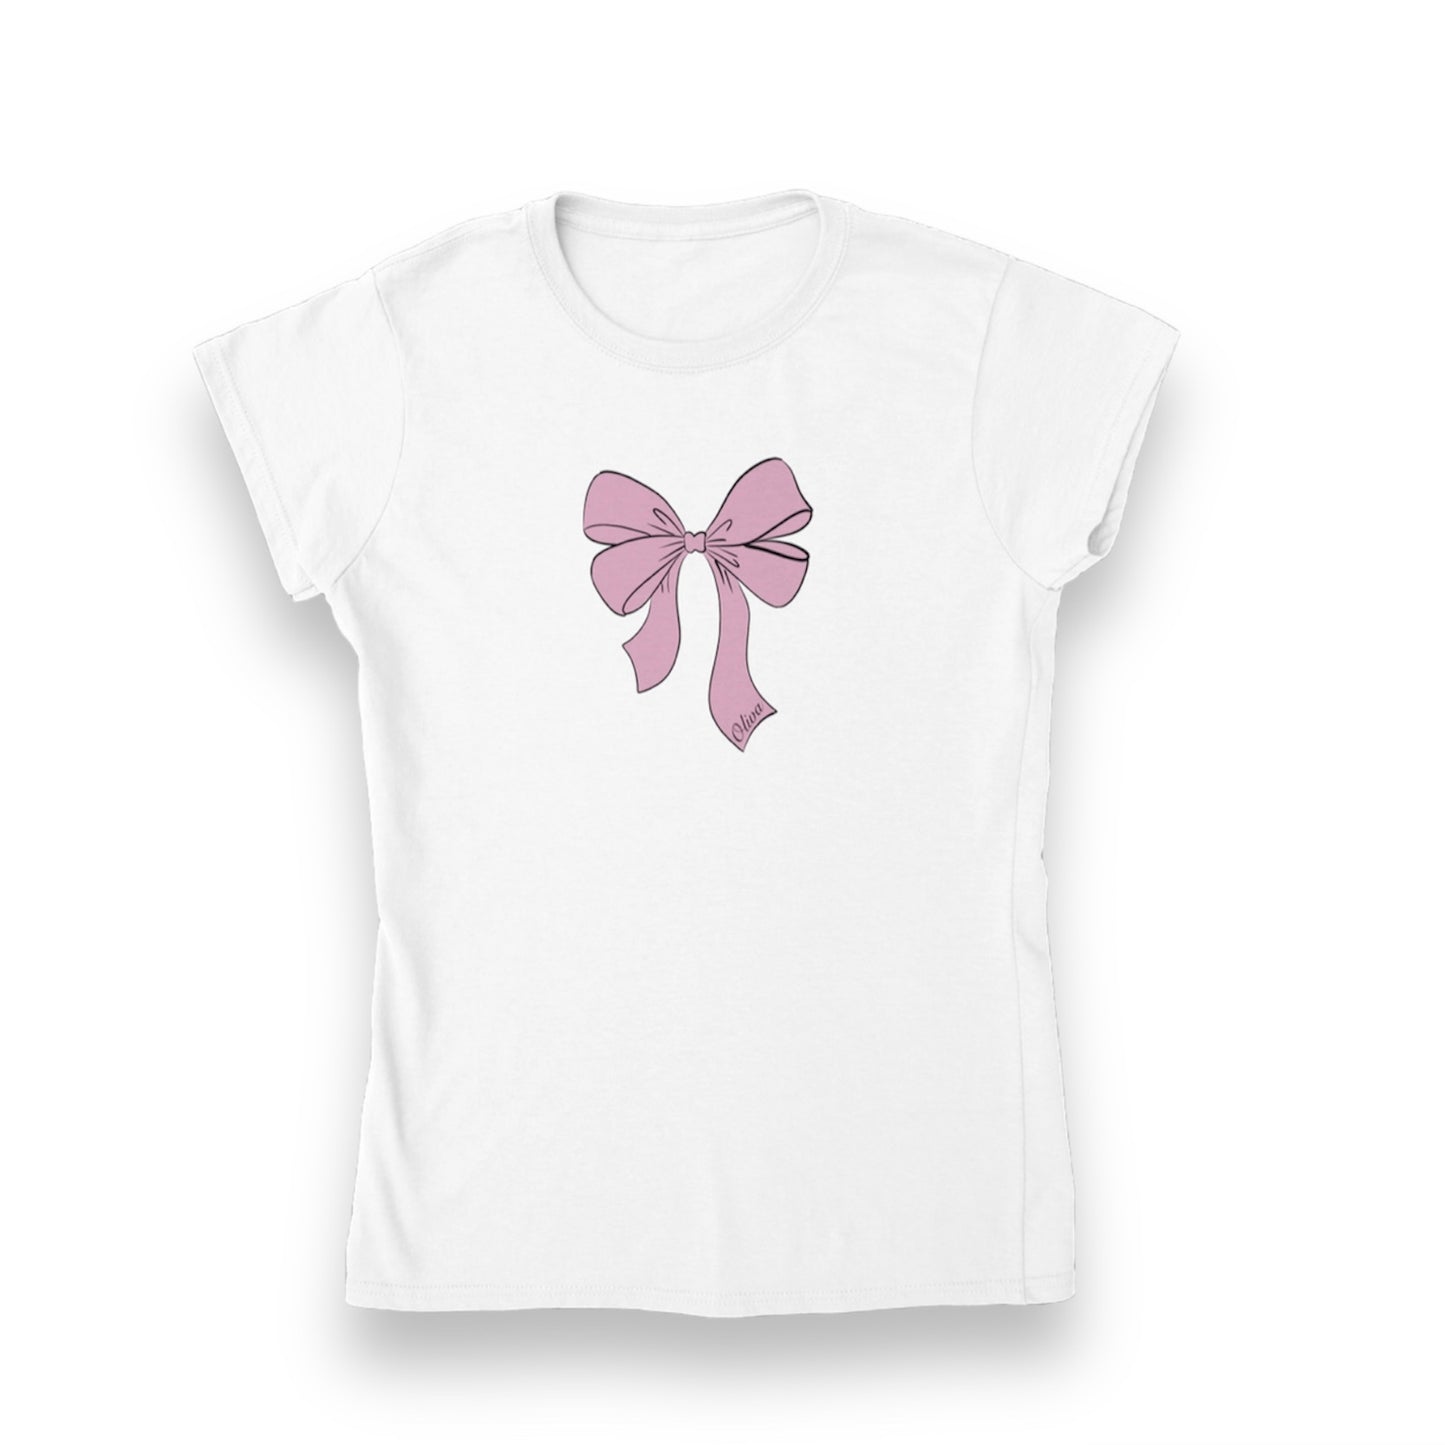 ‘Pretty n Pink’ Bow Baby Tee.